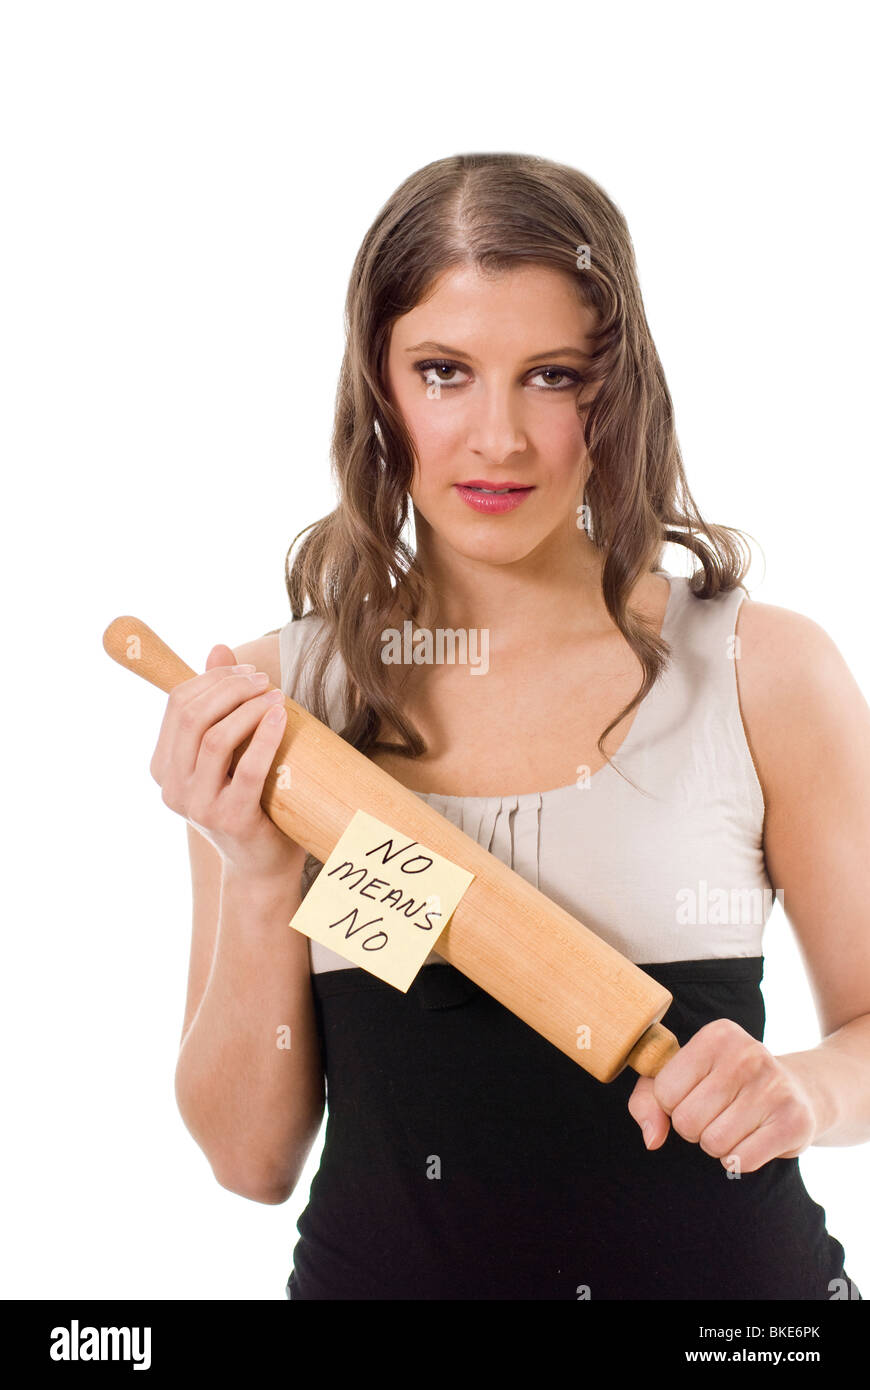 Young woman with a threatening look holding a rolling pin with the words 'No means No' Stock Photo